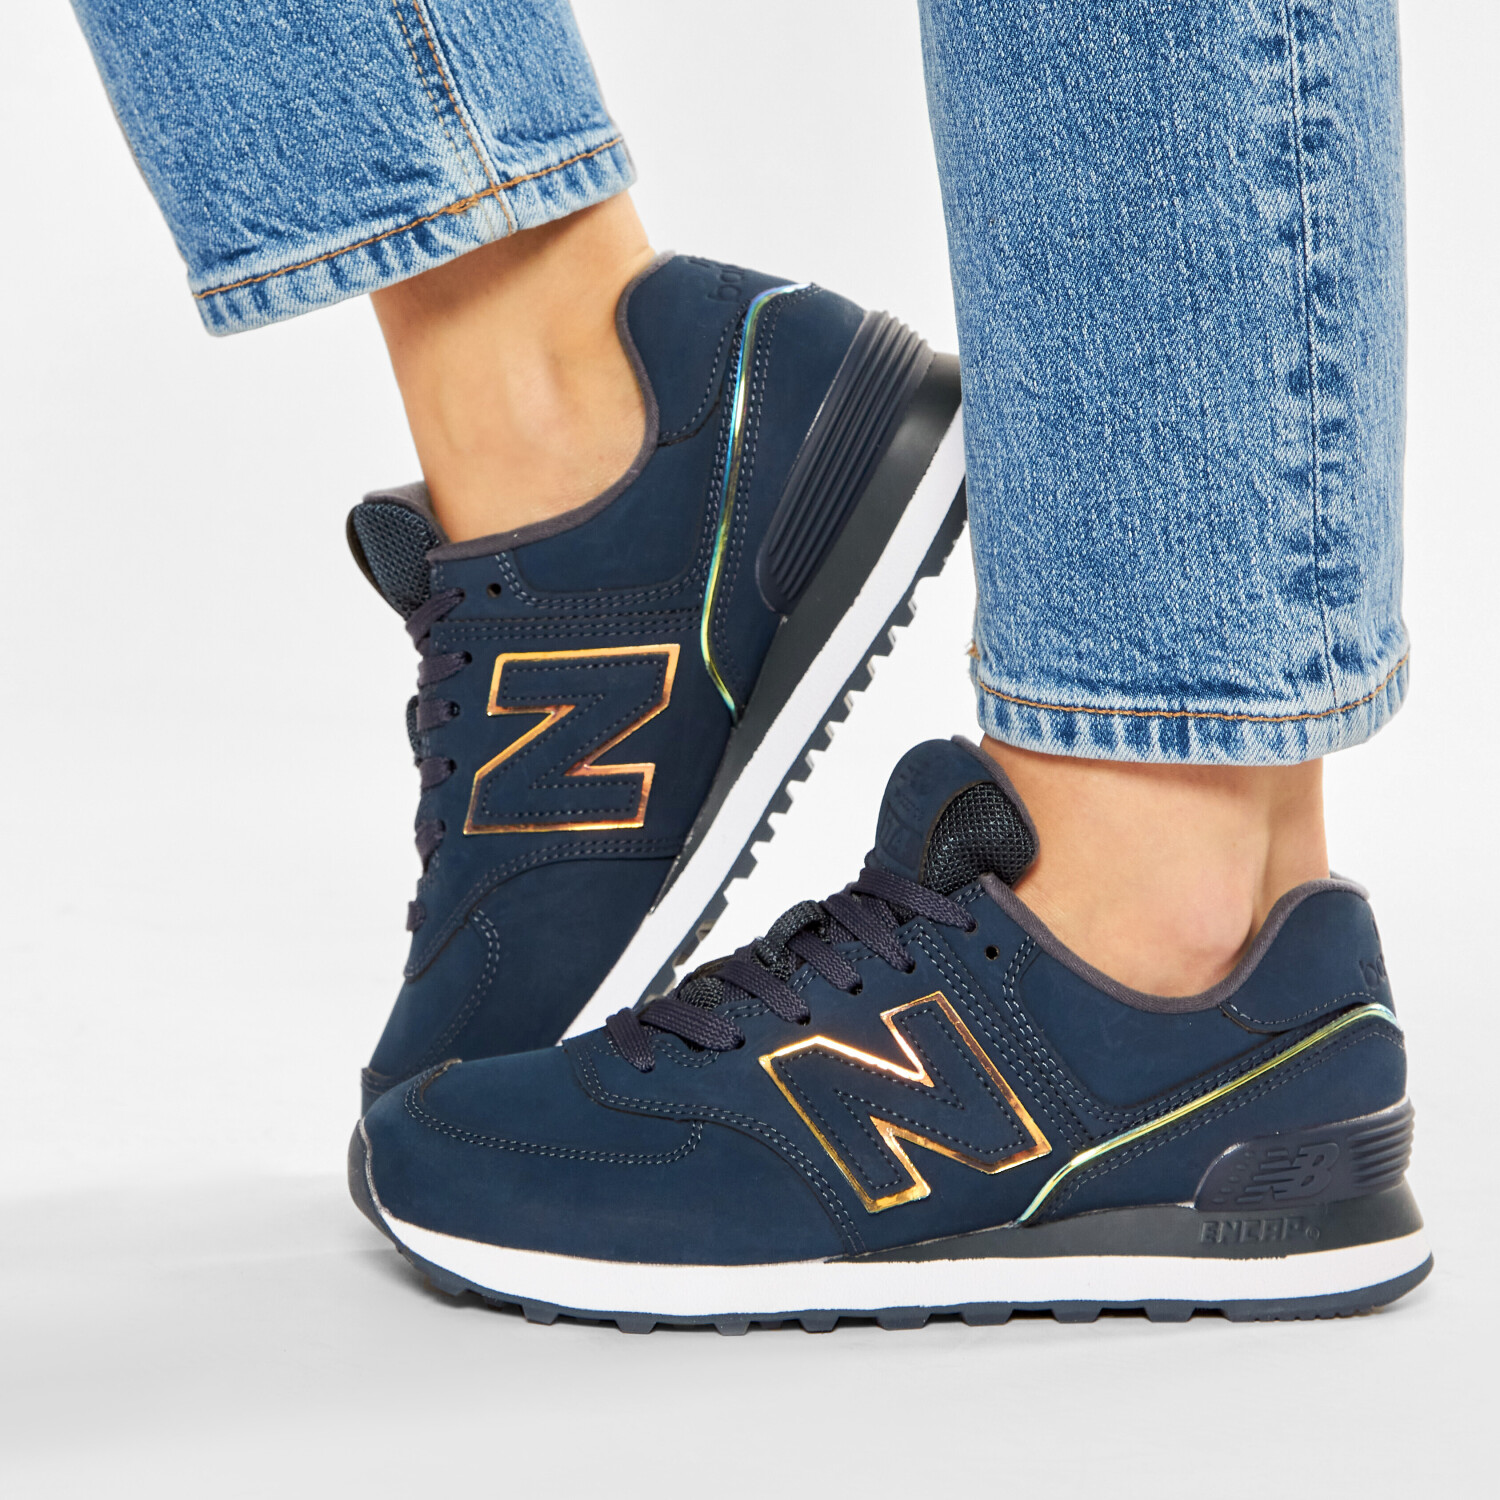 Buy New Balance 574 Women petrol/white from £45.00 (Today) – Best Deals ...